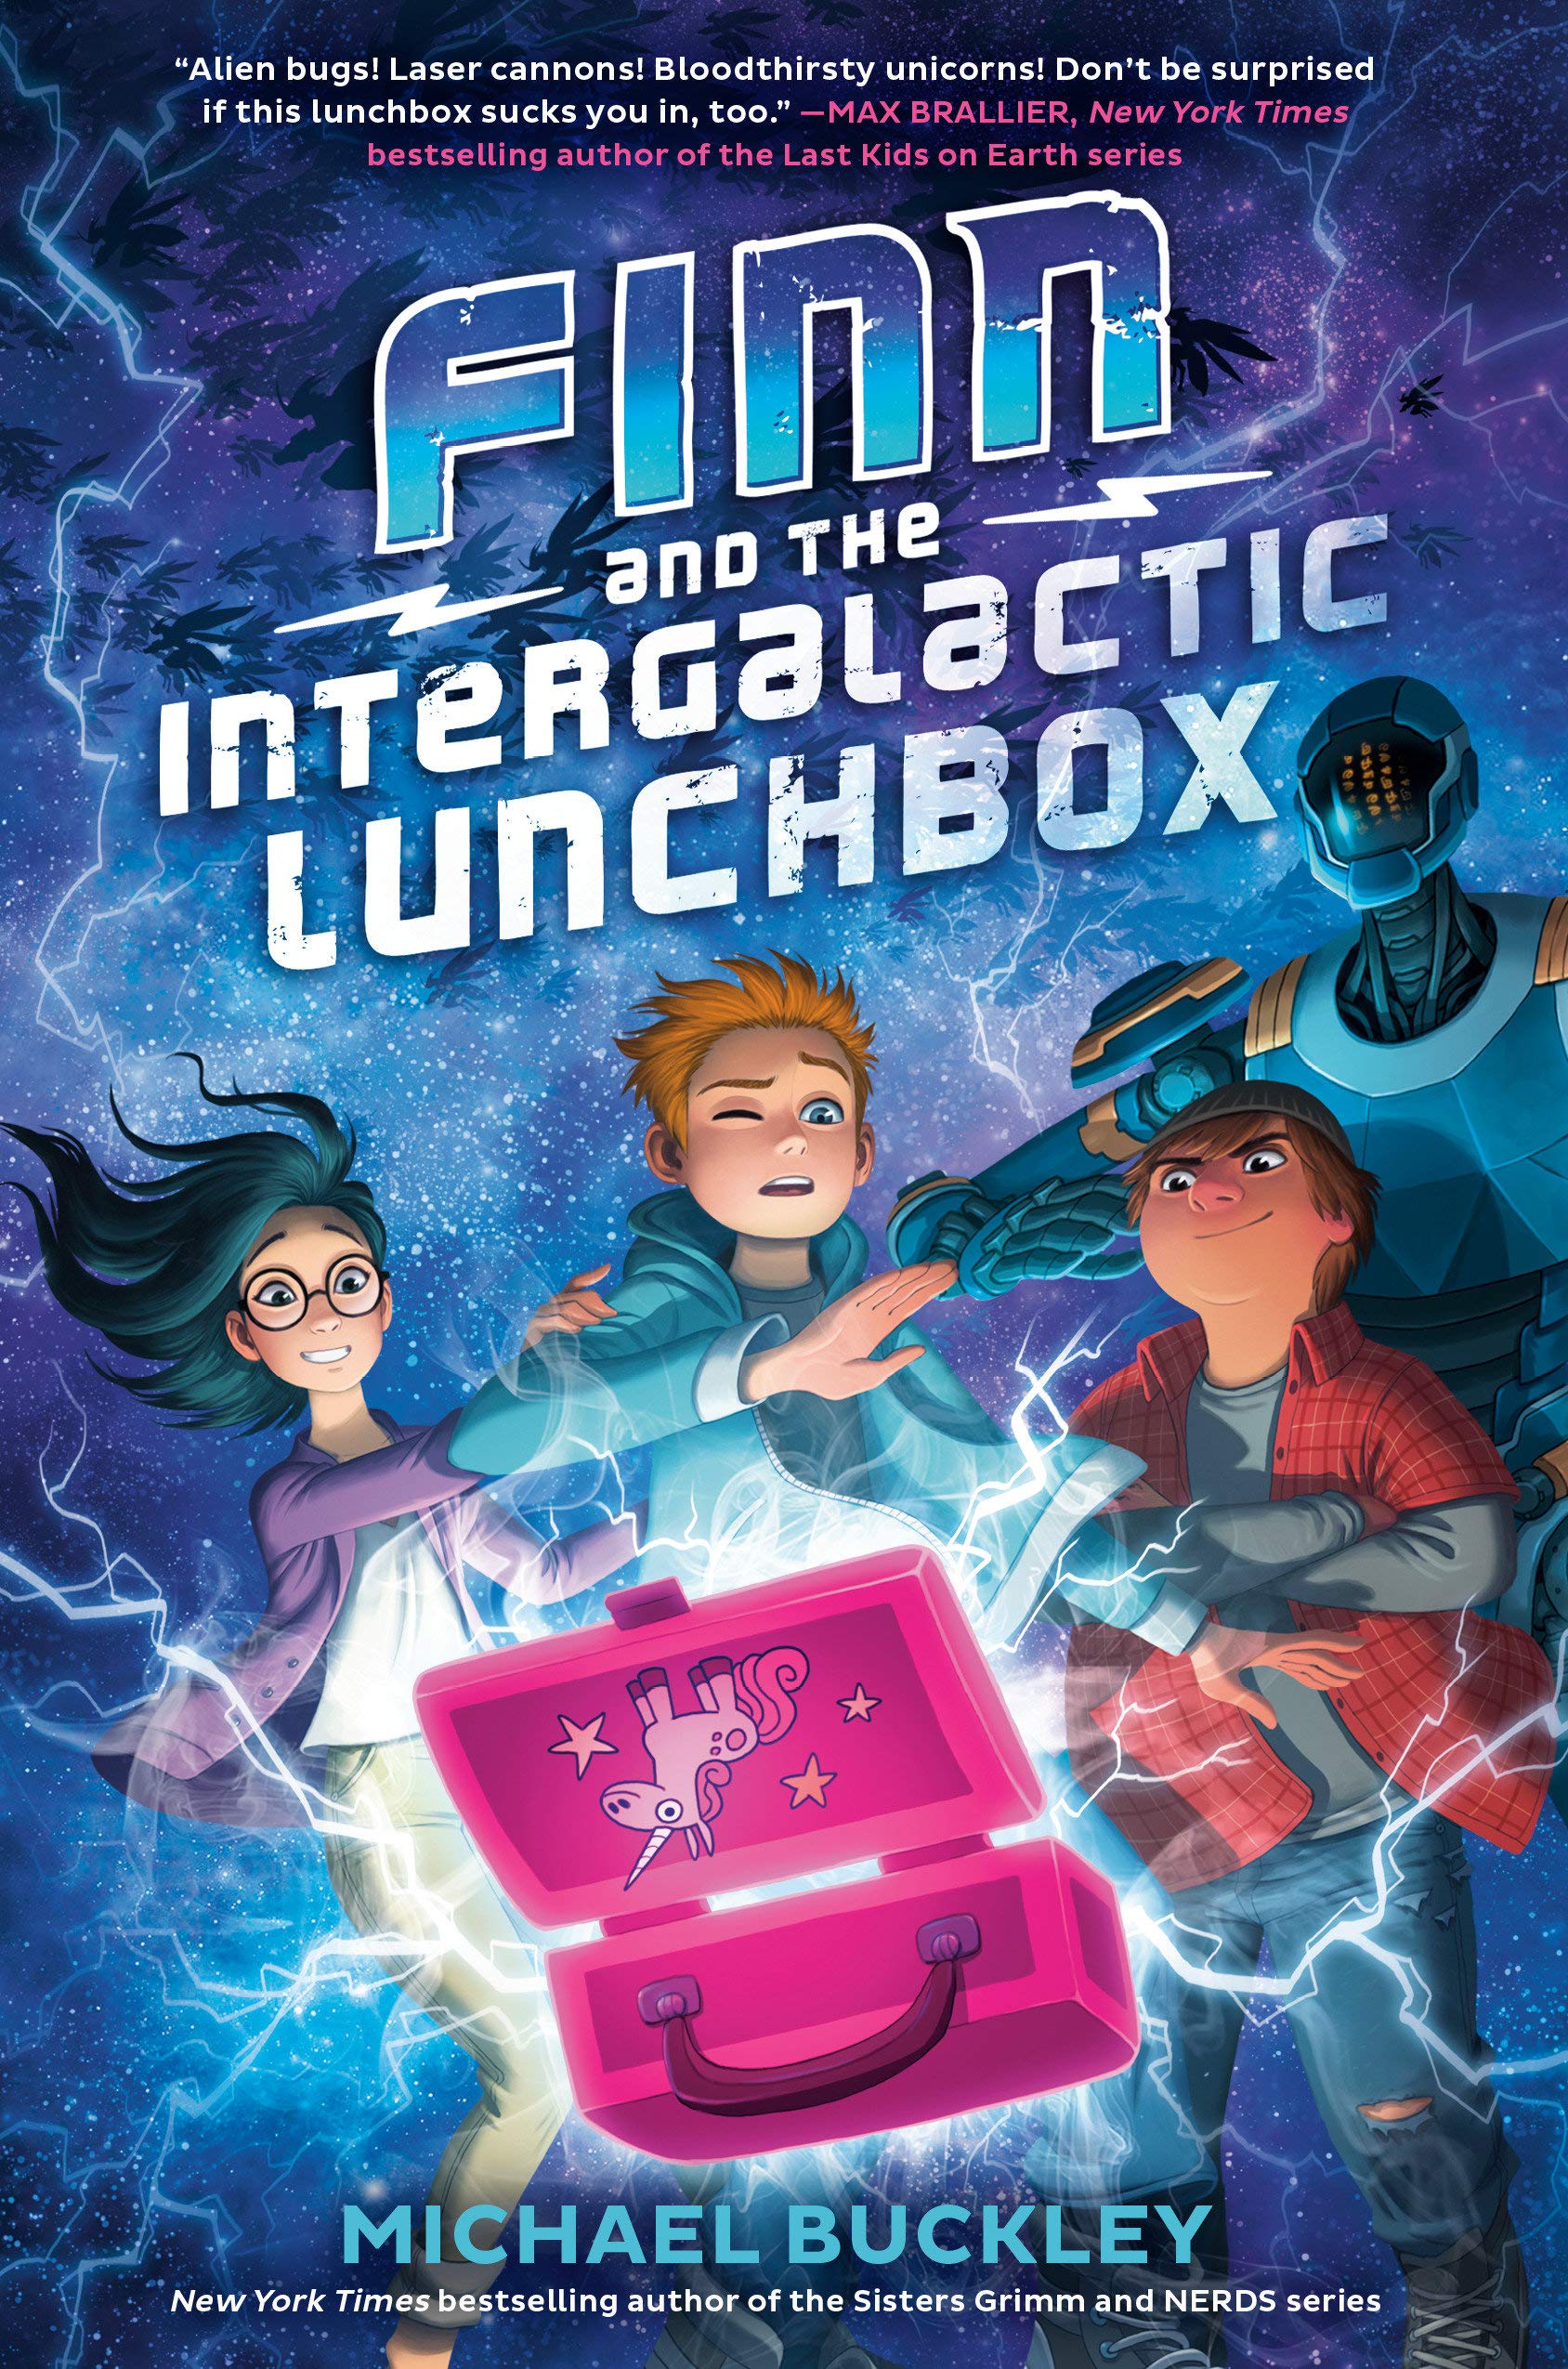 Finn and the Intergalactic Lunchbox (The Finniverse Book 1) by Michael Buckley